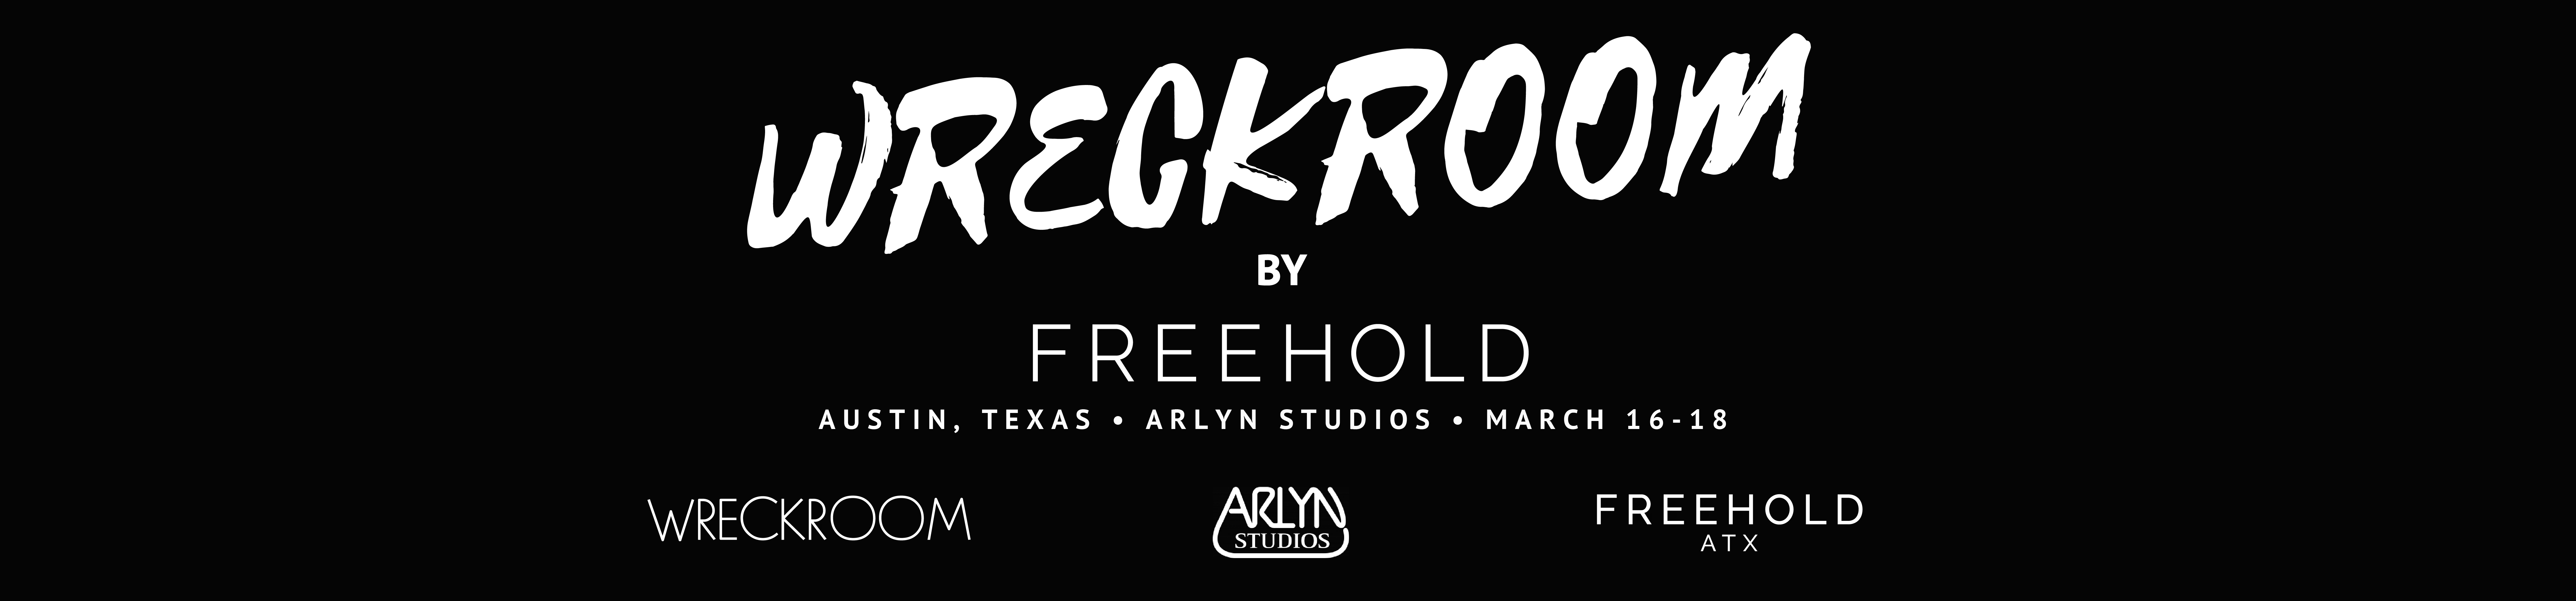  Wreckroom by Freehold